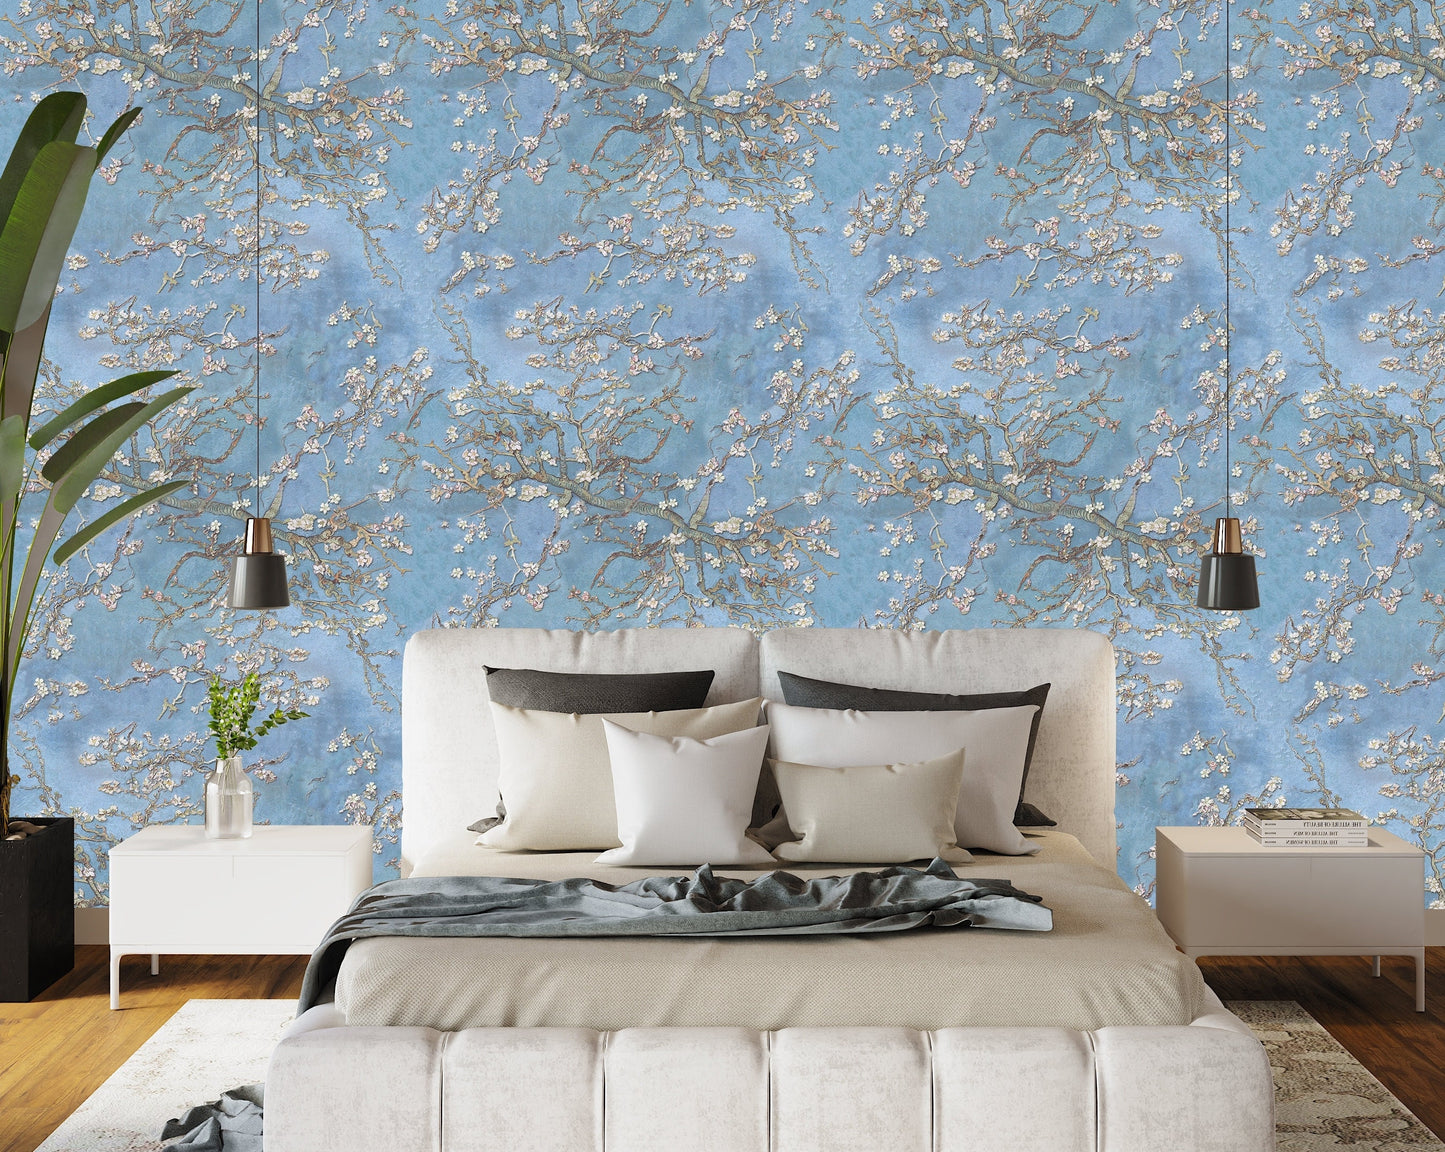 Blue Floral Wallpaper, Cherry Blossom Wallpaper, Chinoiserie Wallpaper Peel and Stick, Vintage Floral Wallpaper, Removable Wall Paper